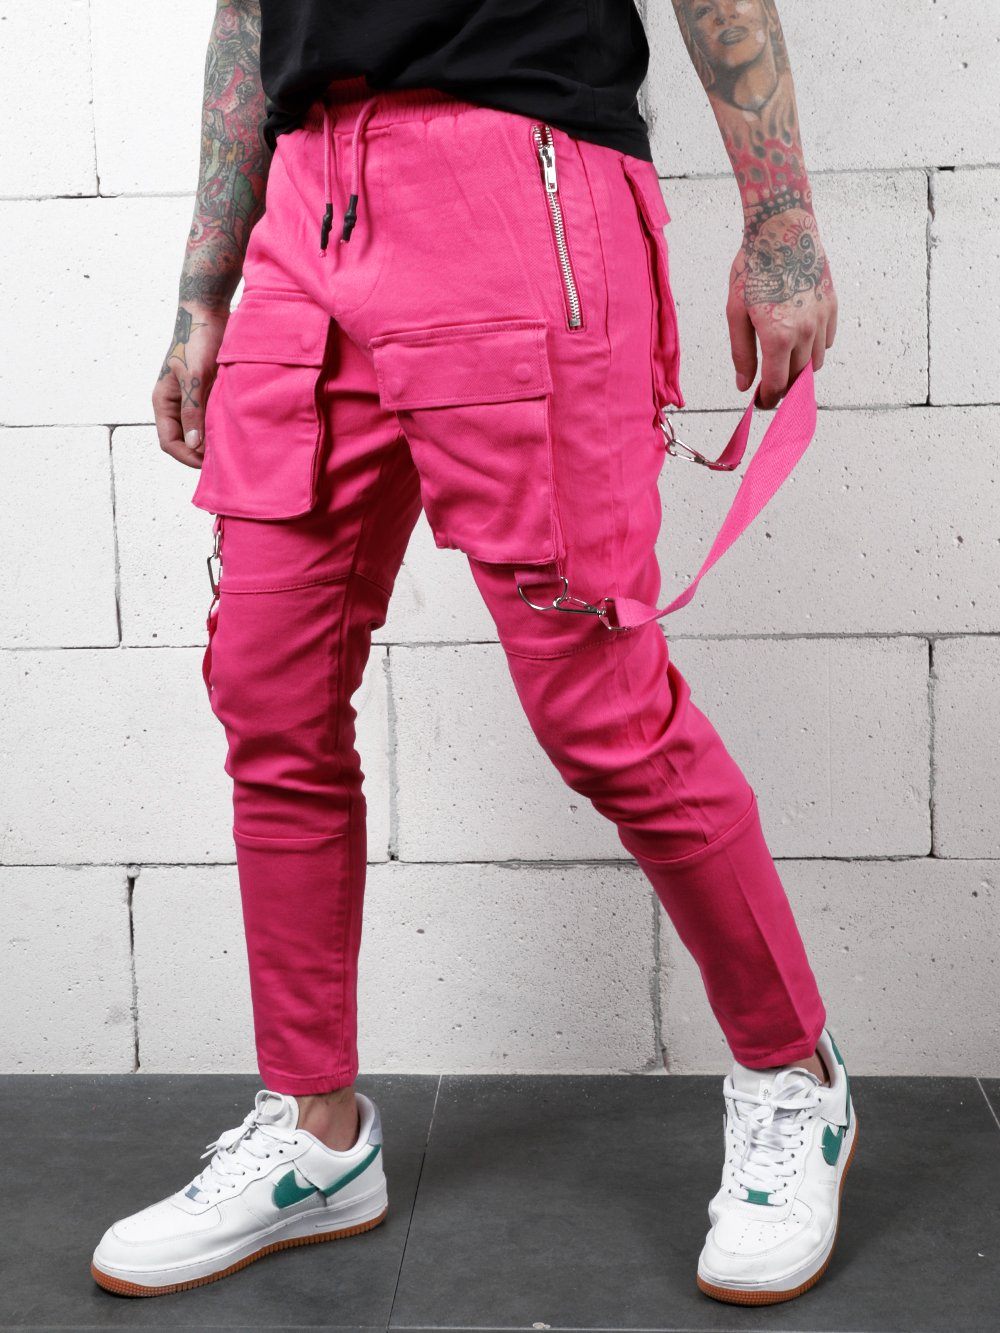 A man wearing PINK BRONX cargo pants with zippers.